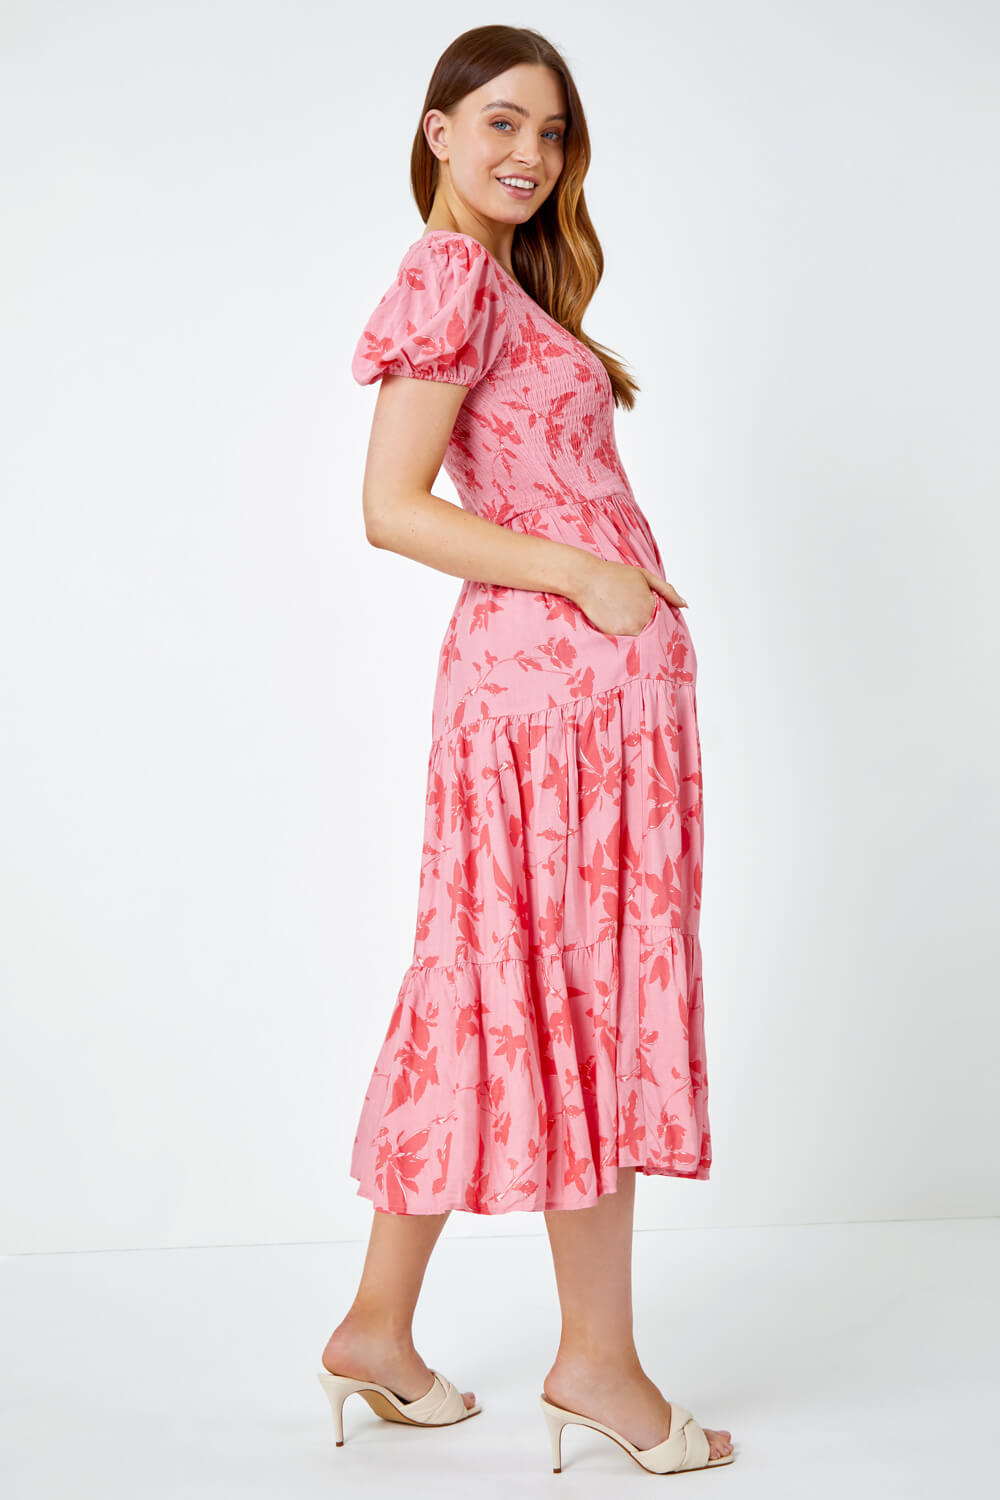 PINK Floral Shirred Waist Tiered Midi Dress, Image 4 of 6